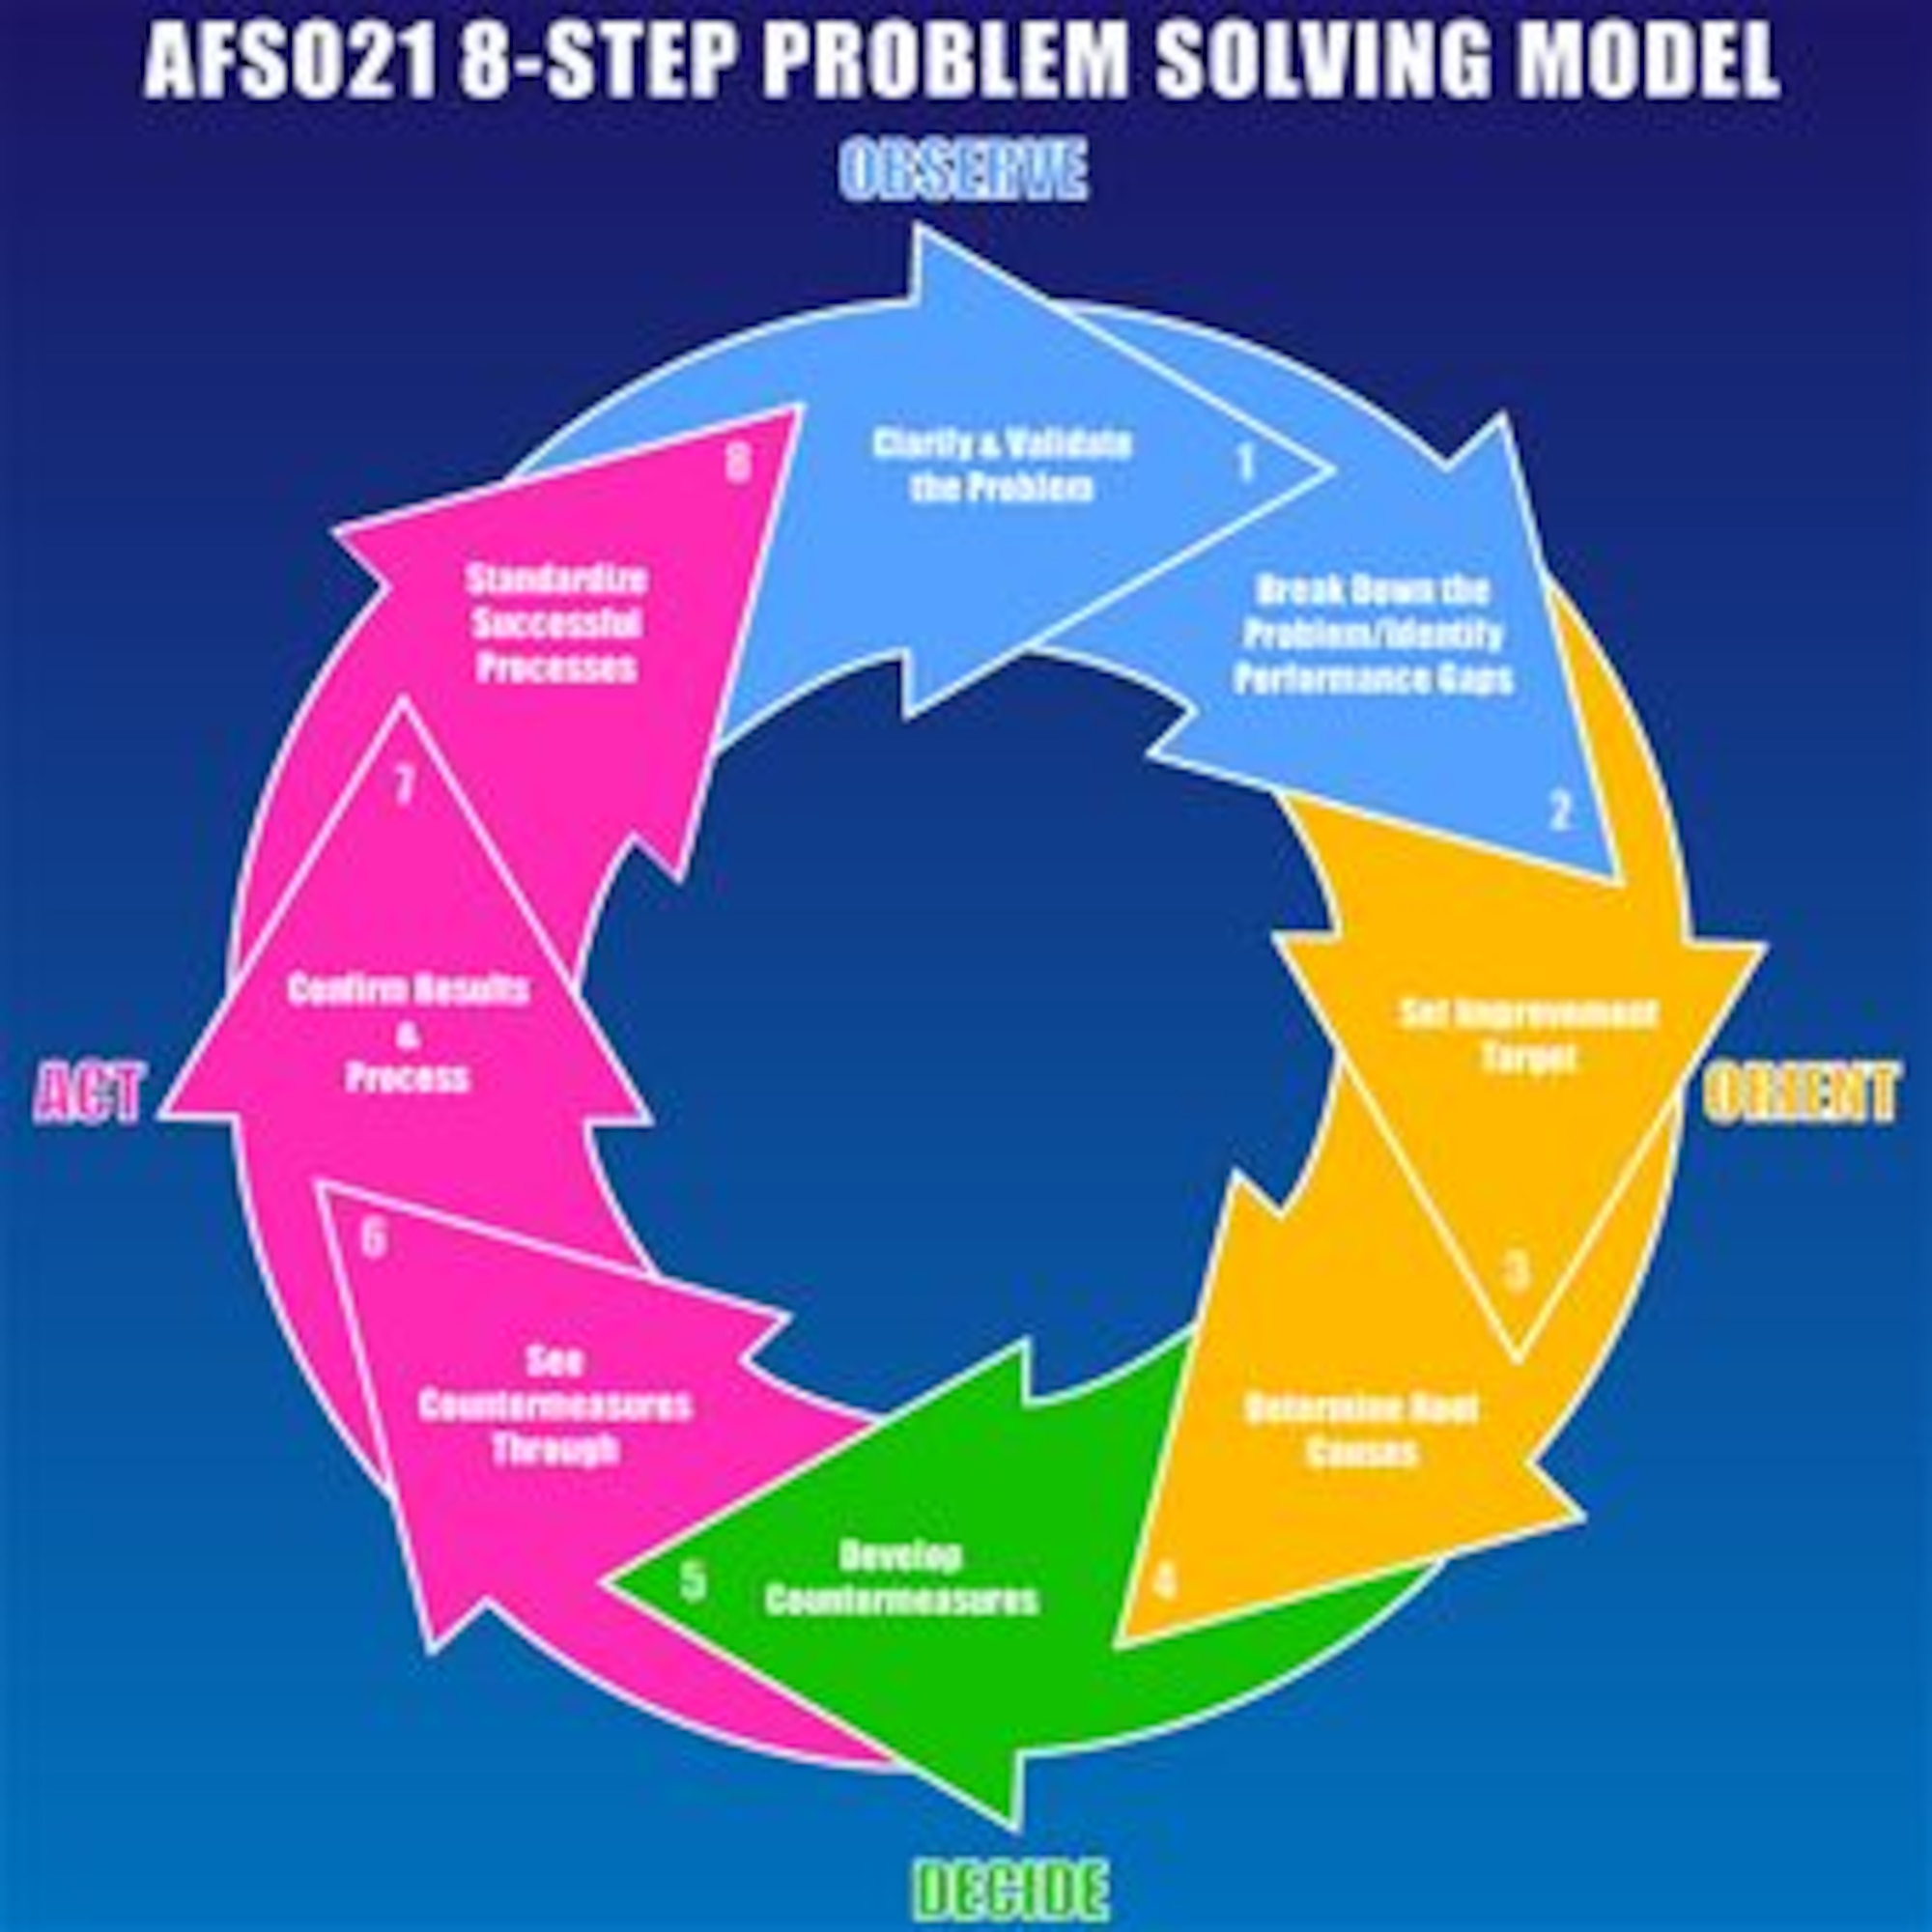 This graphic depicts the 8 step problem solving model for Air Force Smart Operations for the 21st Century. AFSO-21 is starting to take shape and improve operations in 507th Air Refueling Wing. (U.S. Air Force Graphic)